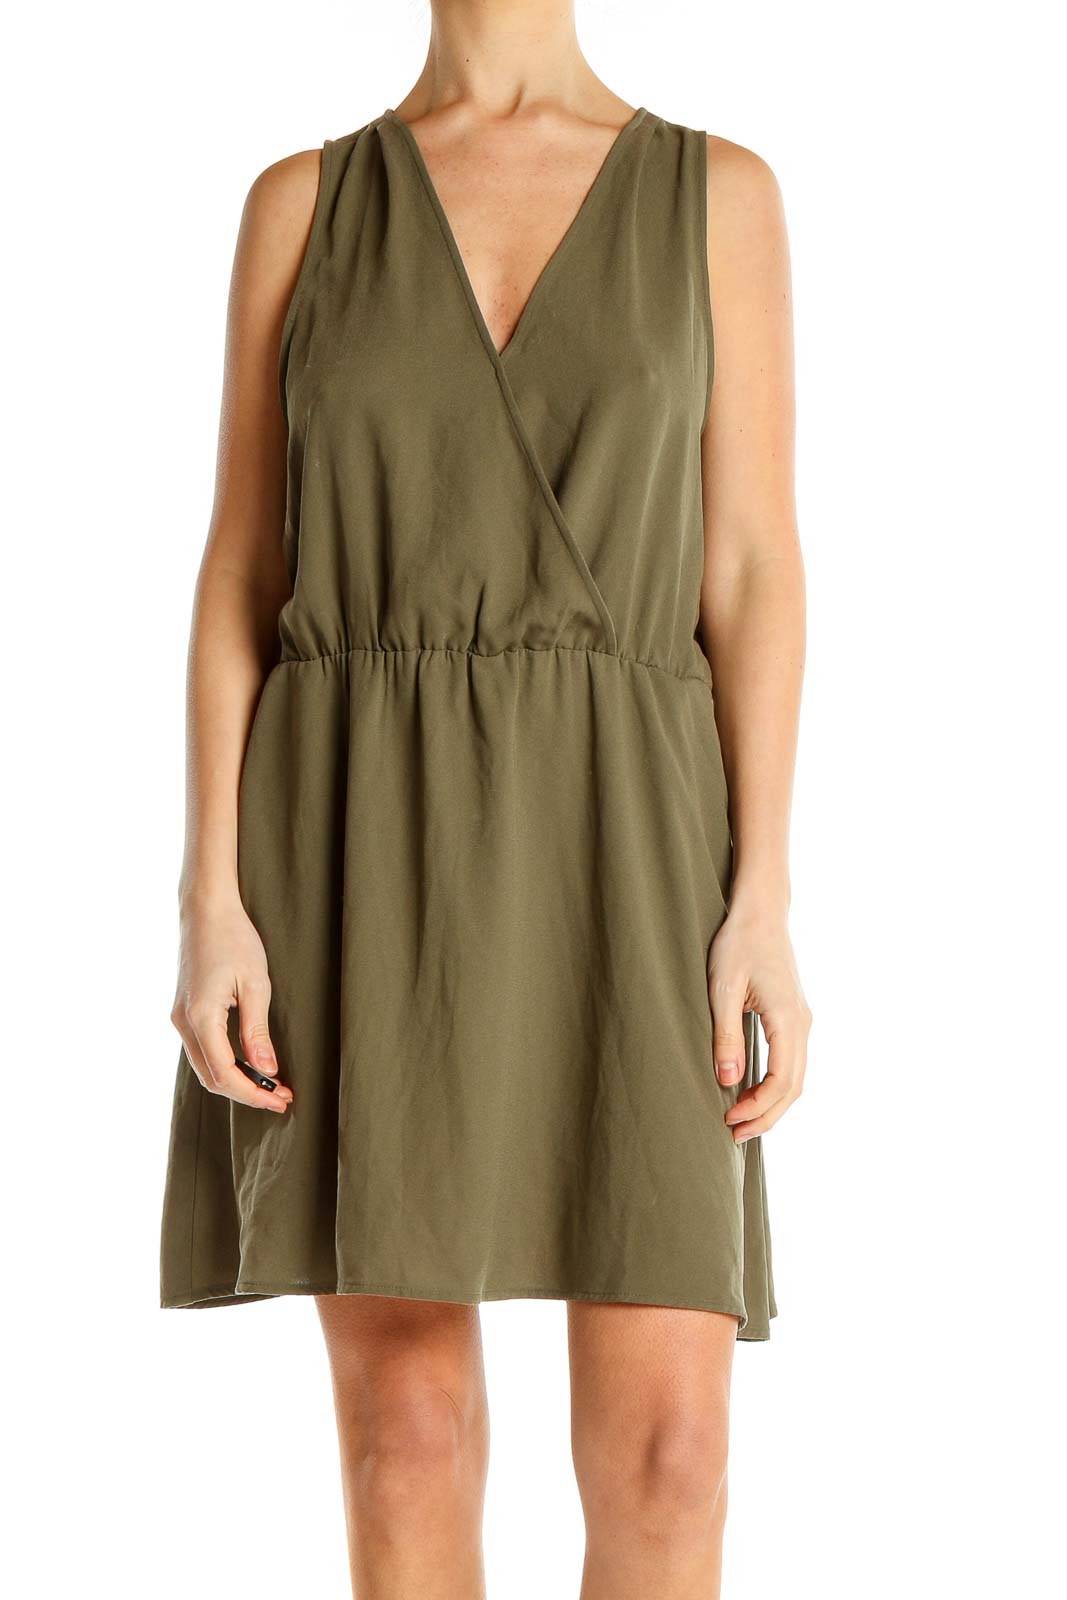 Green Casual Fit & Flare Dress Front